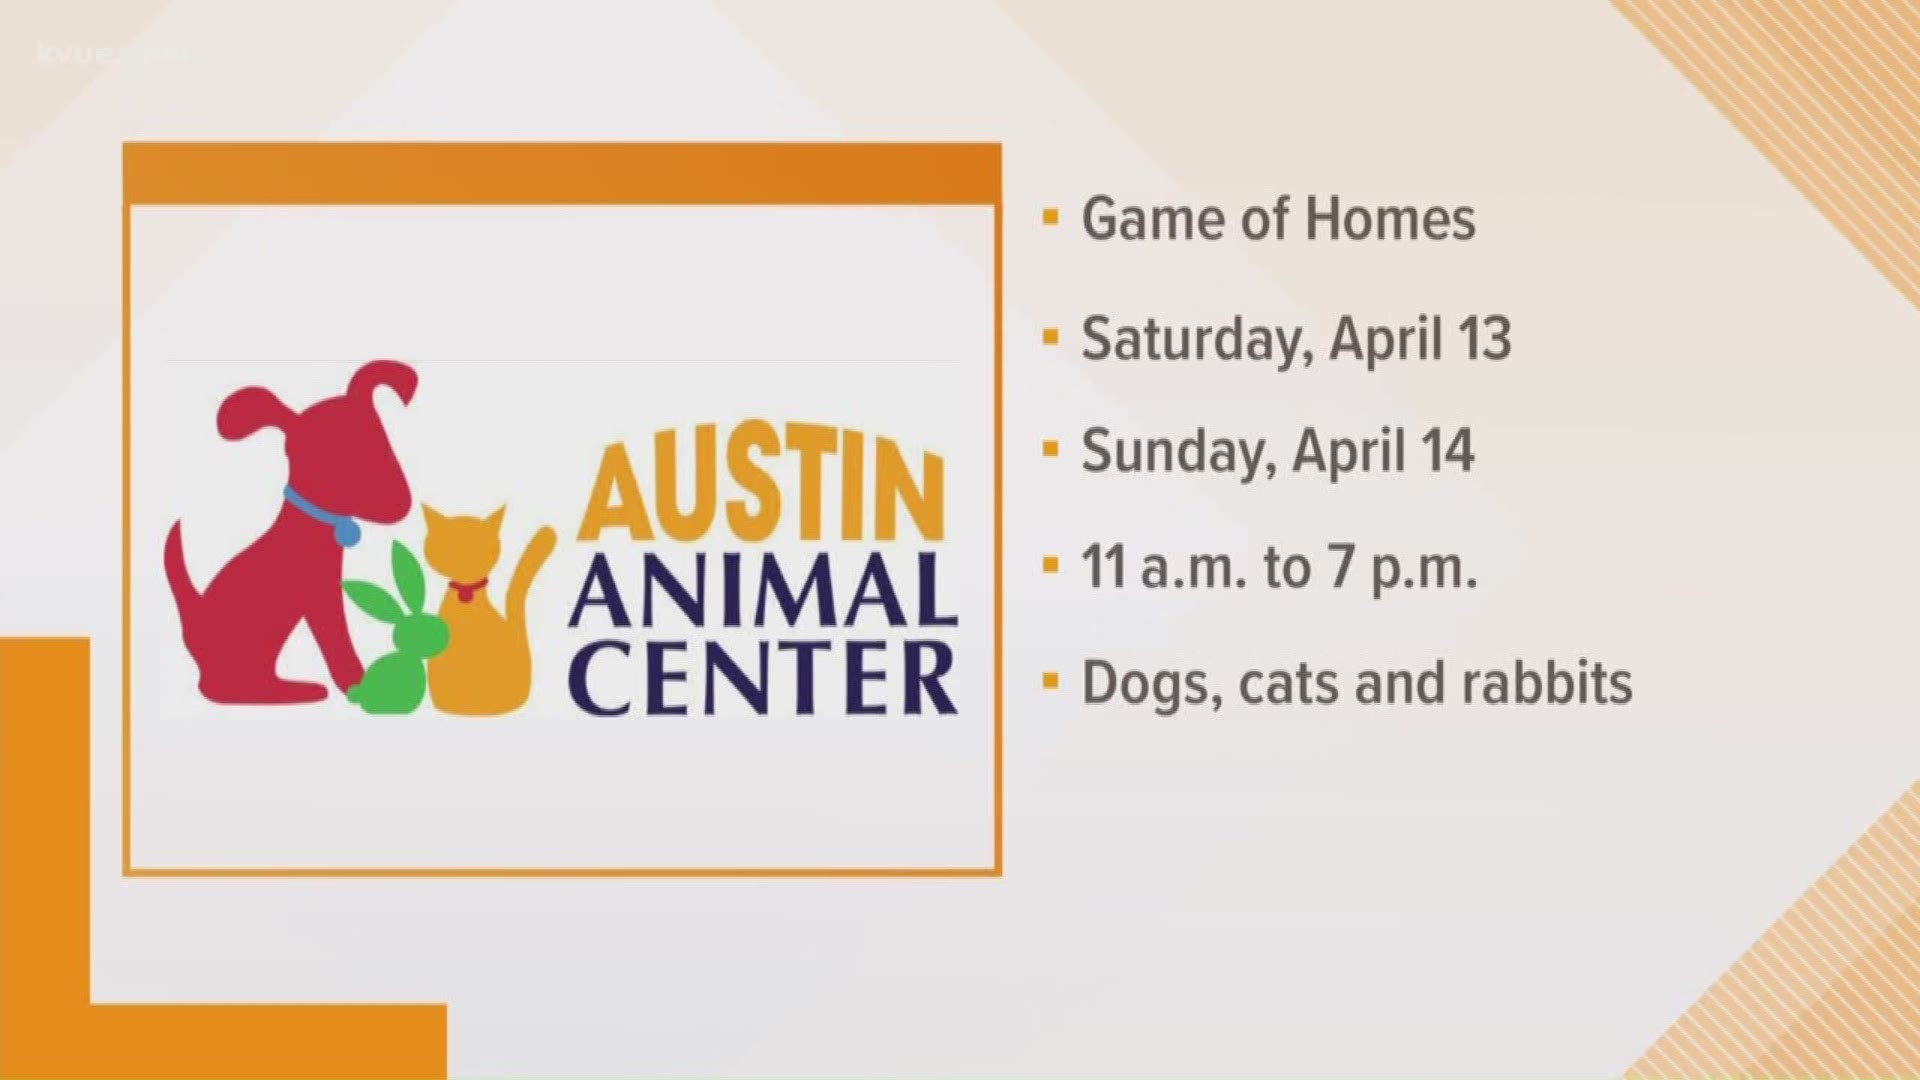 If you’re a Game of Thrones fan and want a new furry friend, Austin Animal Center wants to help. No, they’re not giving out direwolves.